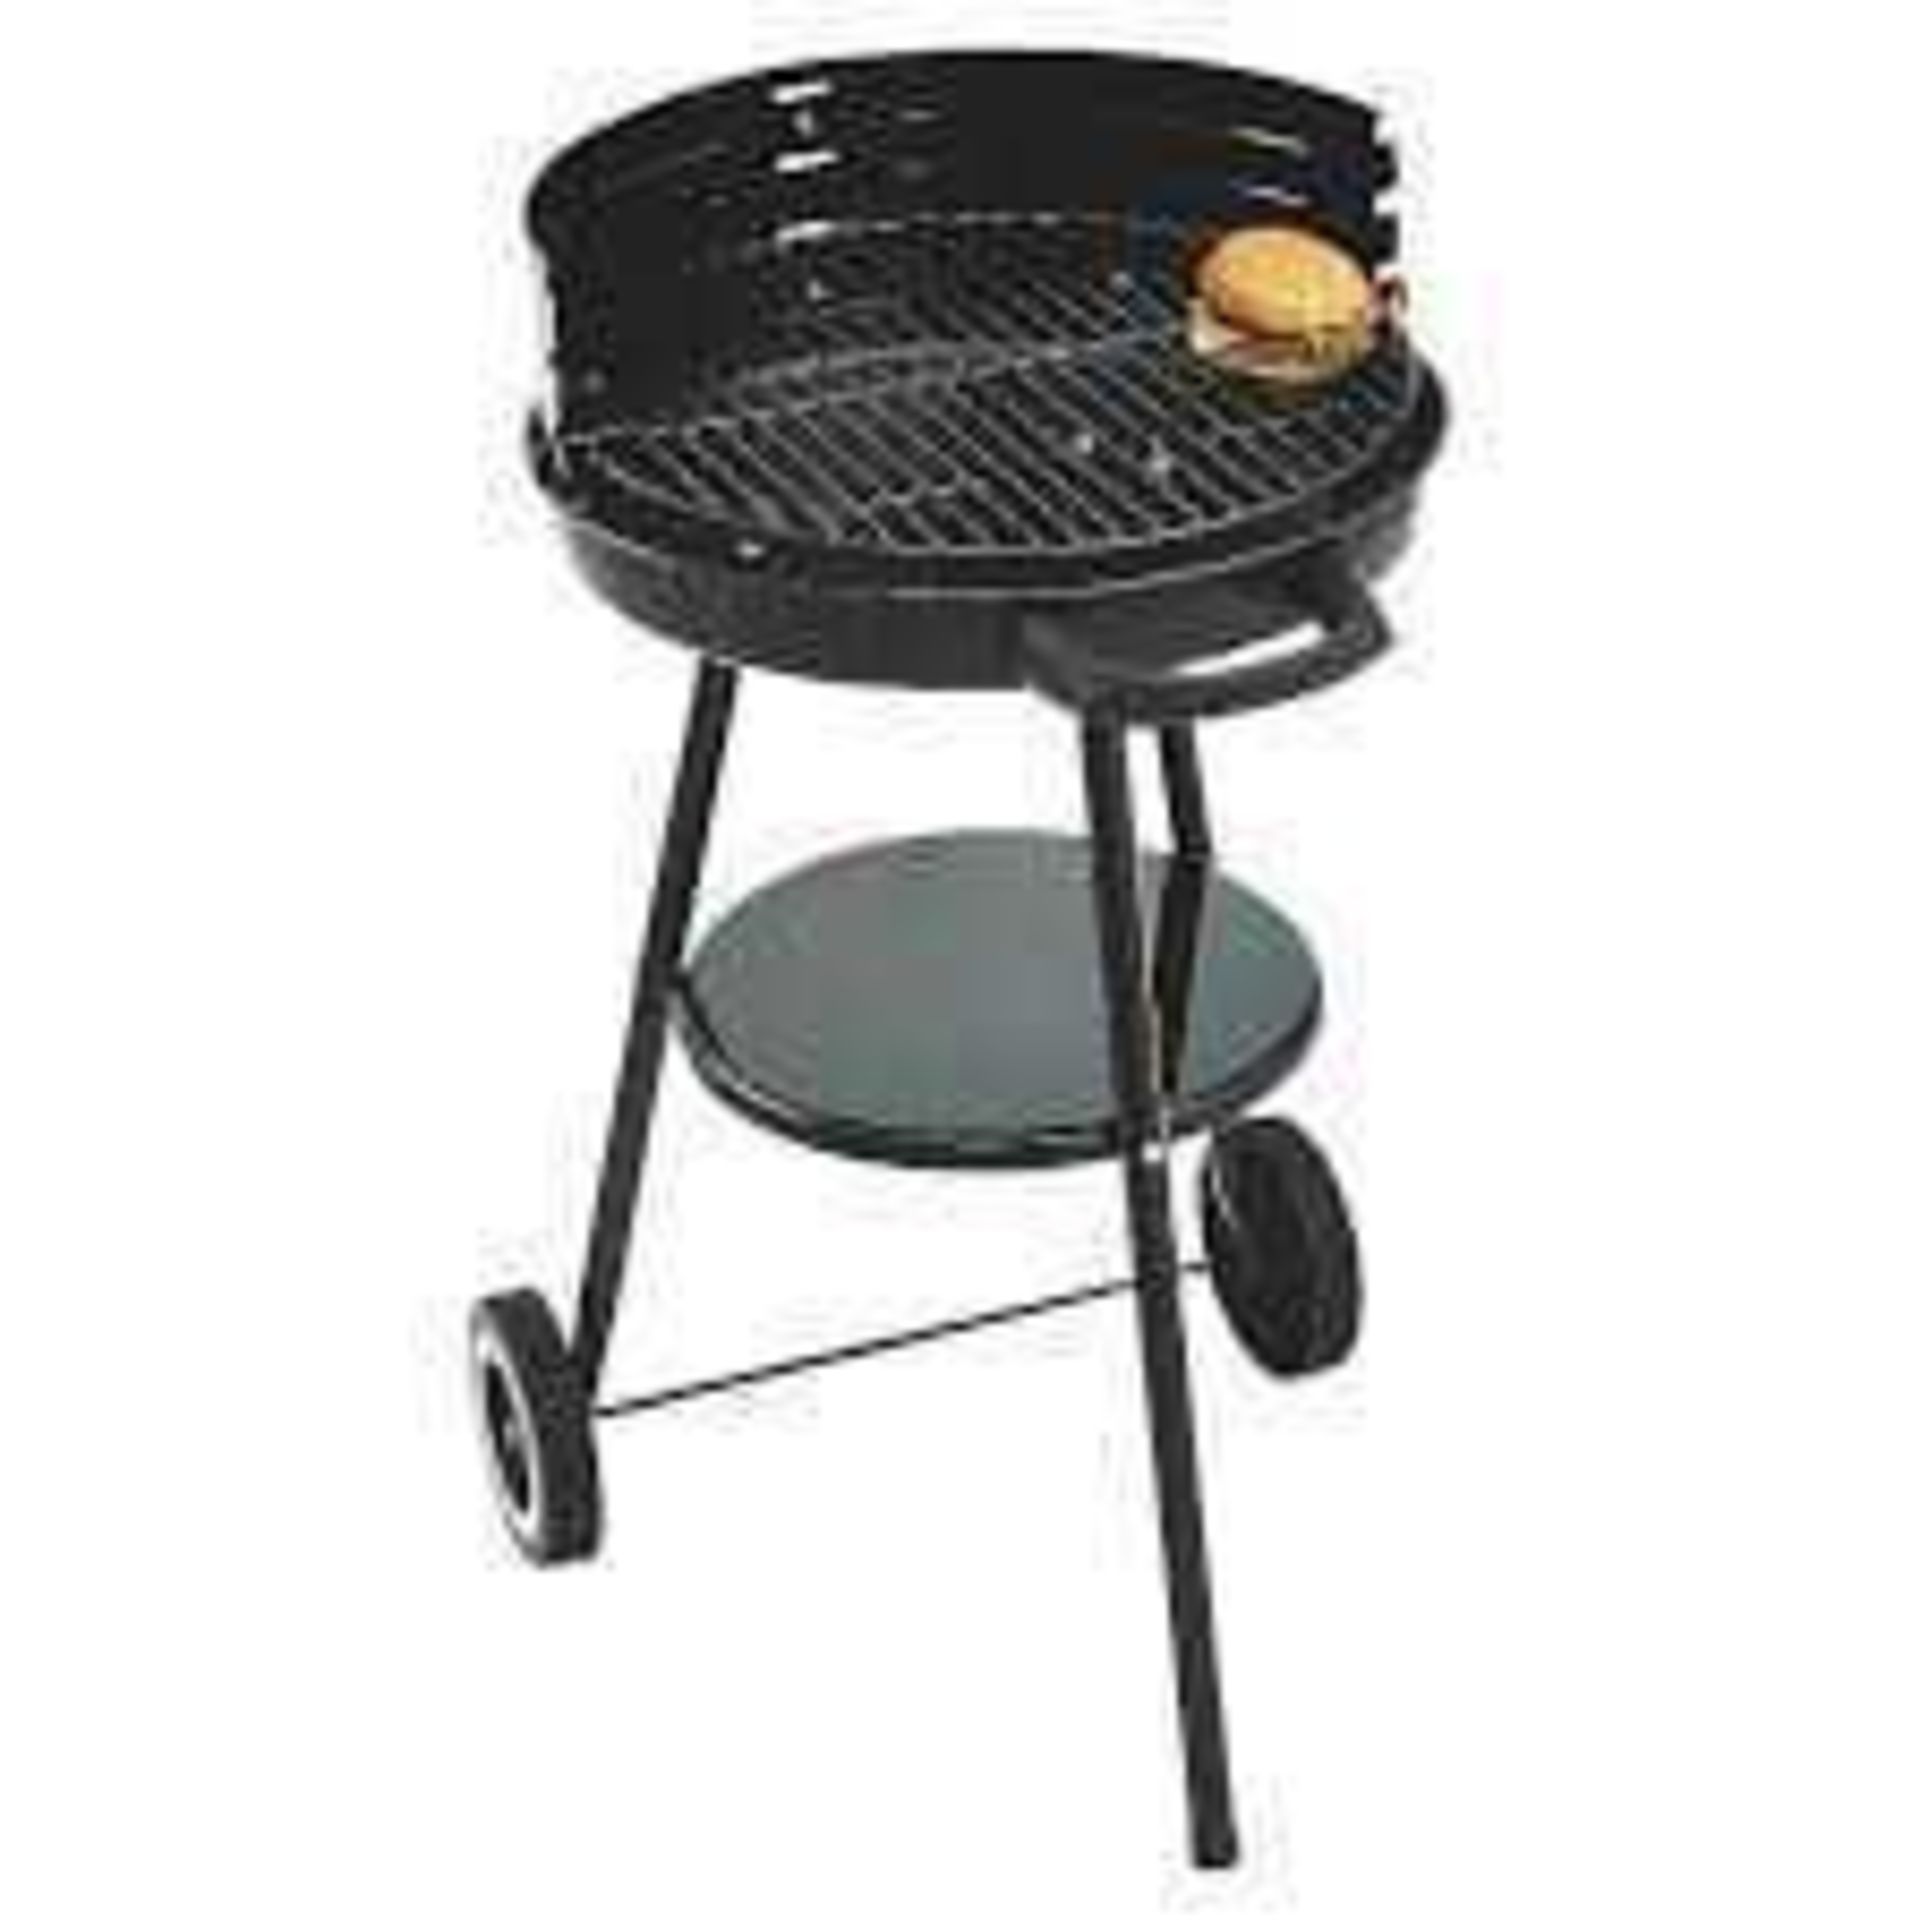 Rrp £60 Boxed Assorted Items To Include A Expert Grill 40Cm Classic Bbq And A Expert Grill 43Cm Kett - Image 2 of 2